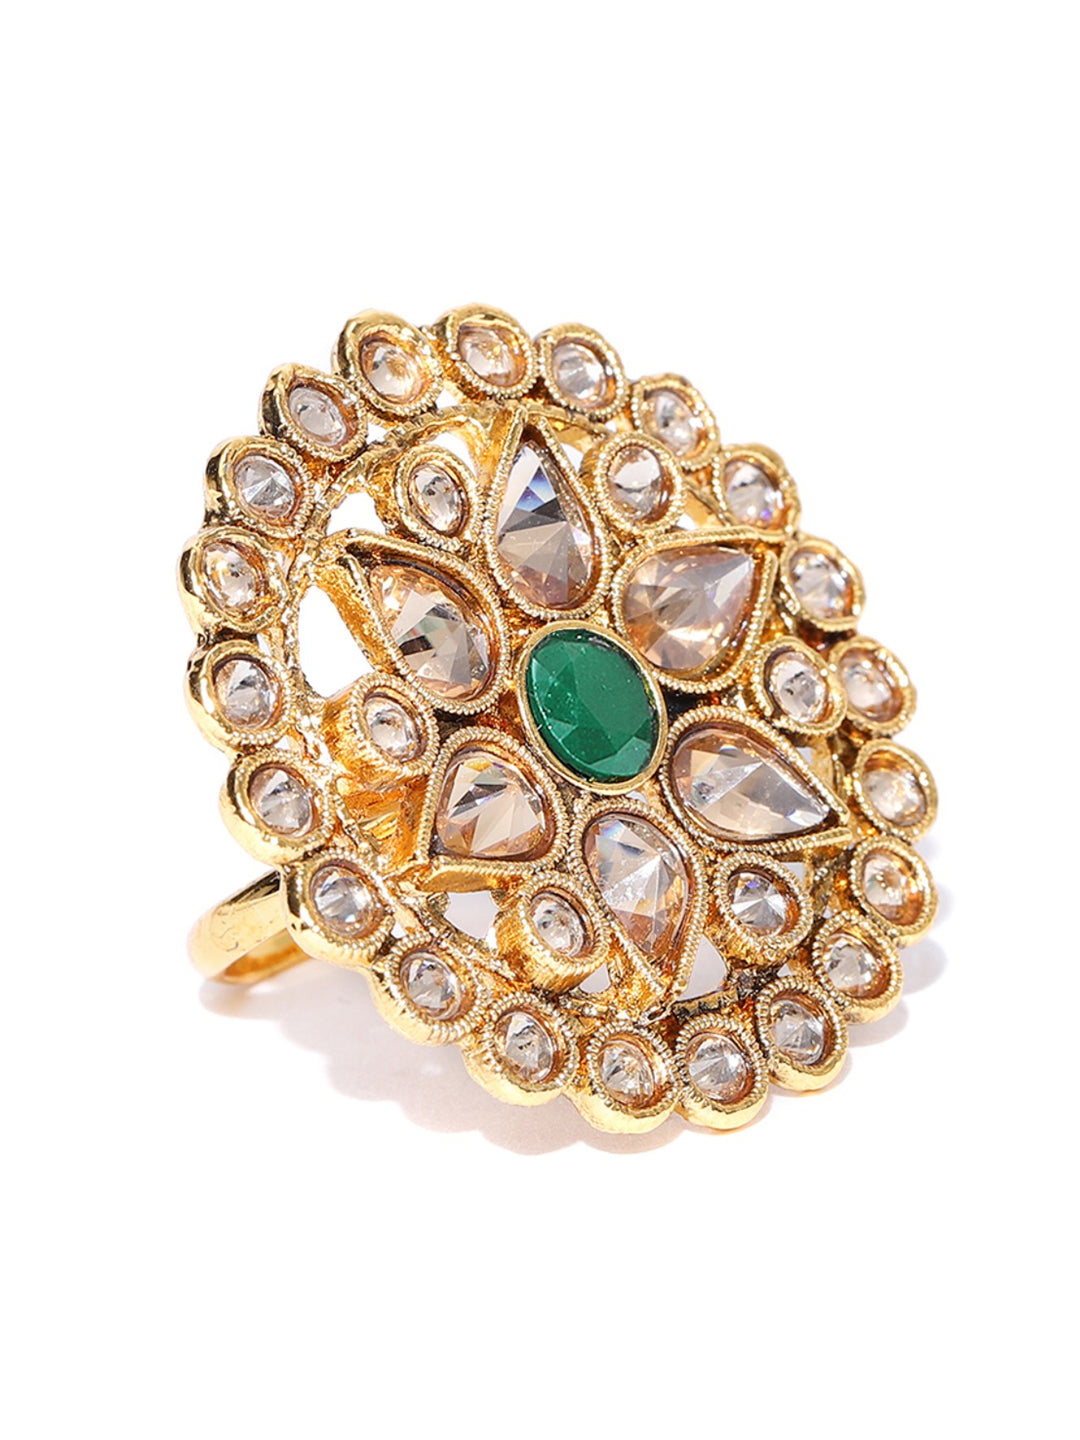 Designer Gold Plated Crystal, Green Stone and Kundan Studded Floral Design Stylish Adjustable Round Ring For Women And Girls